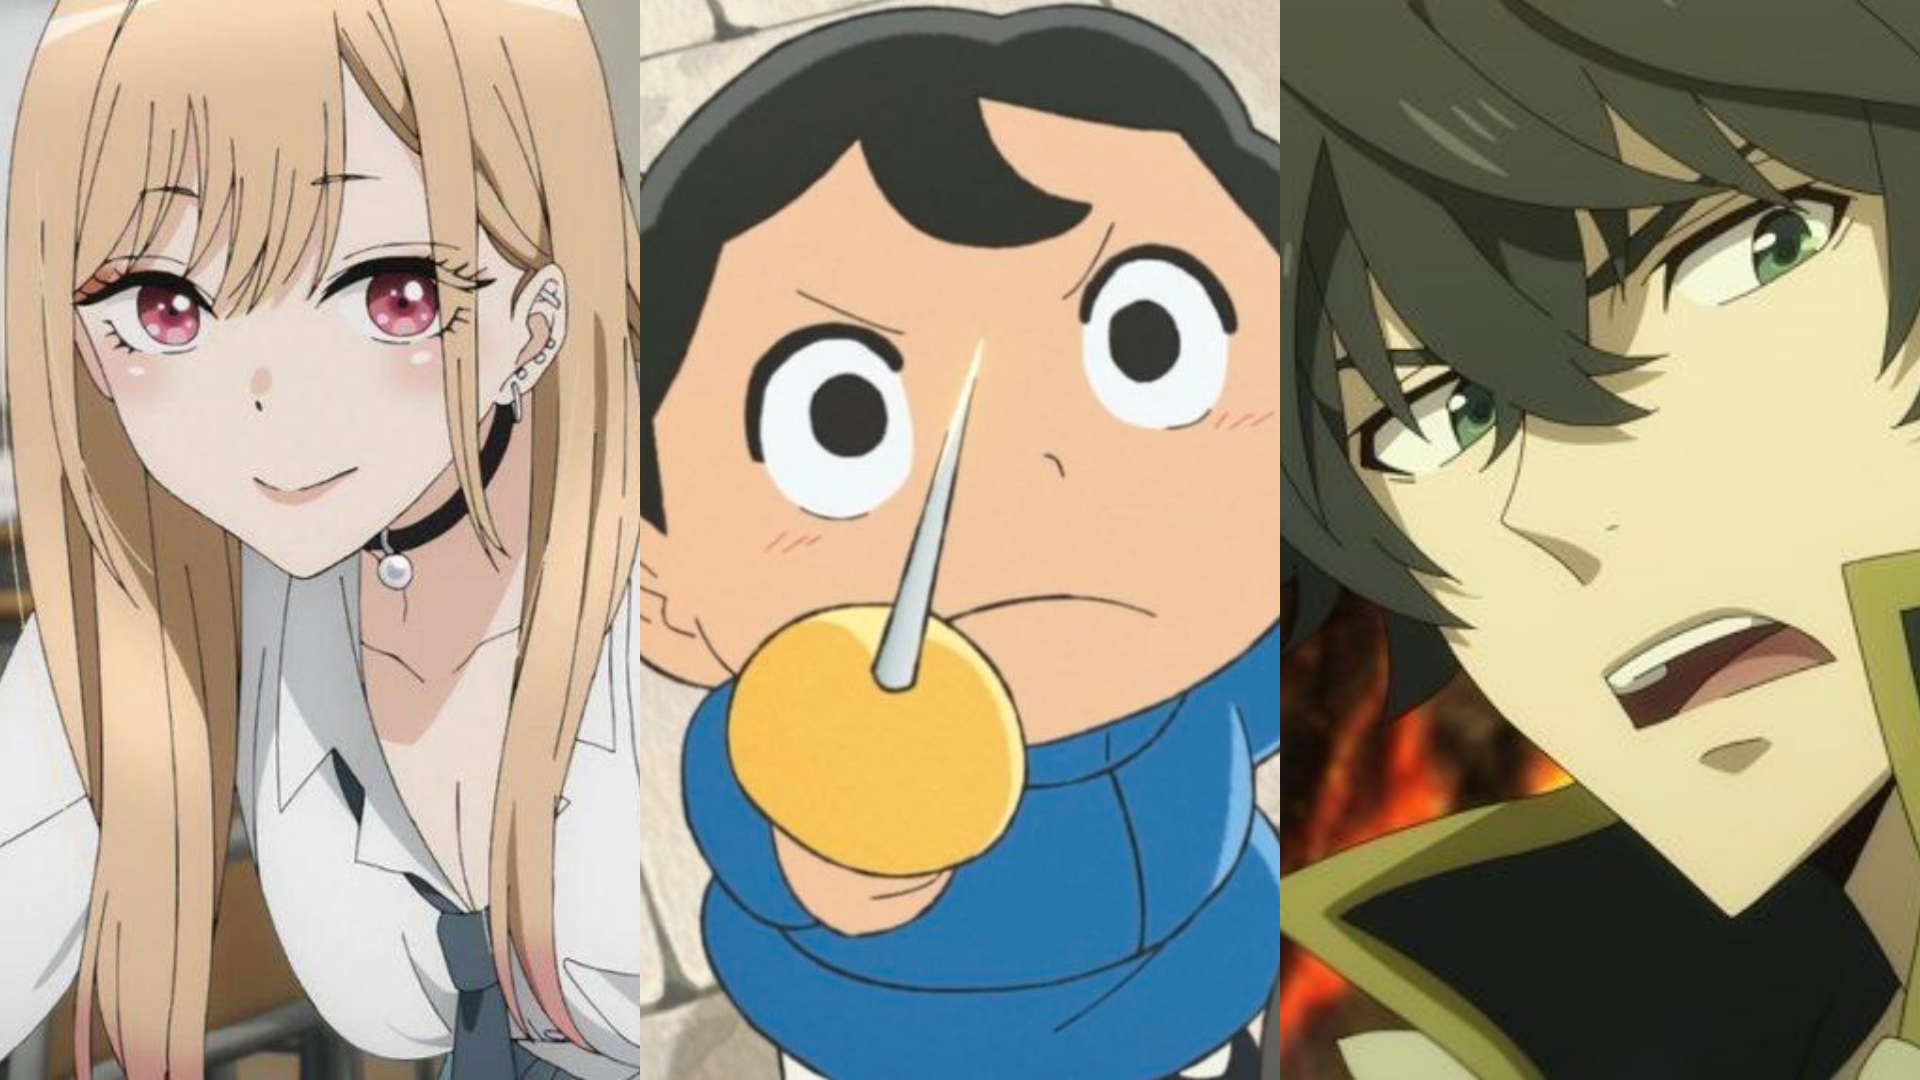 Crunchyroll Sets Dubs in Production for Winter Season